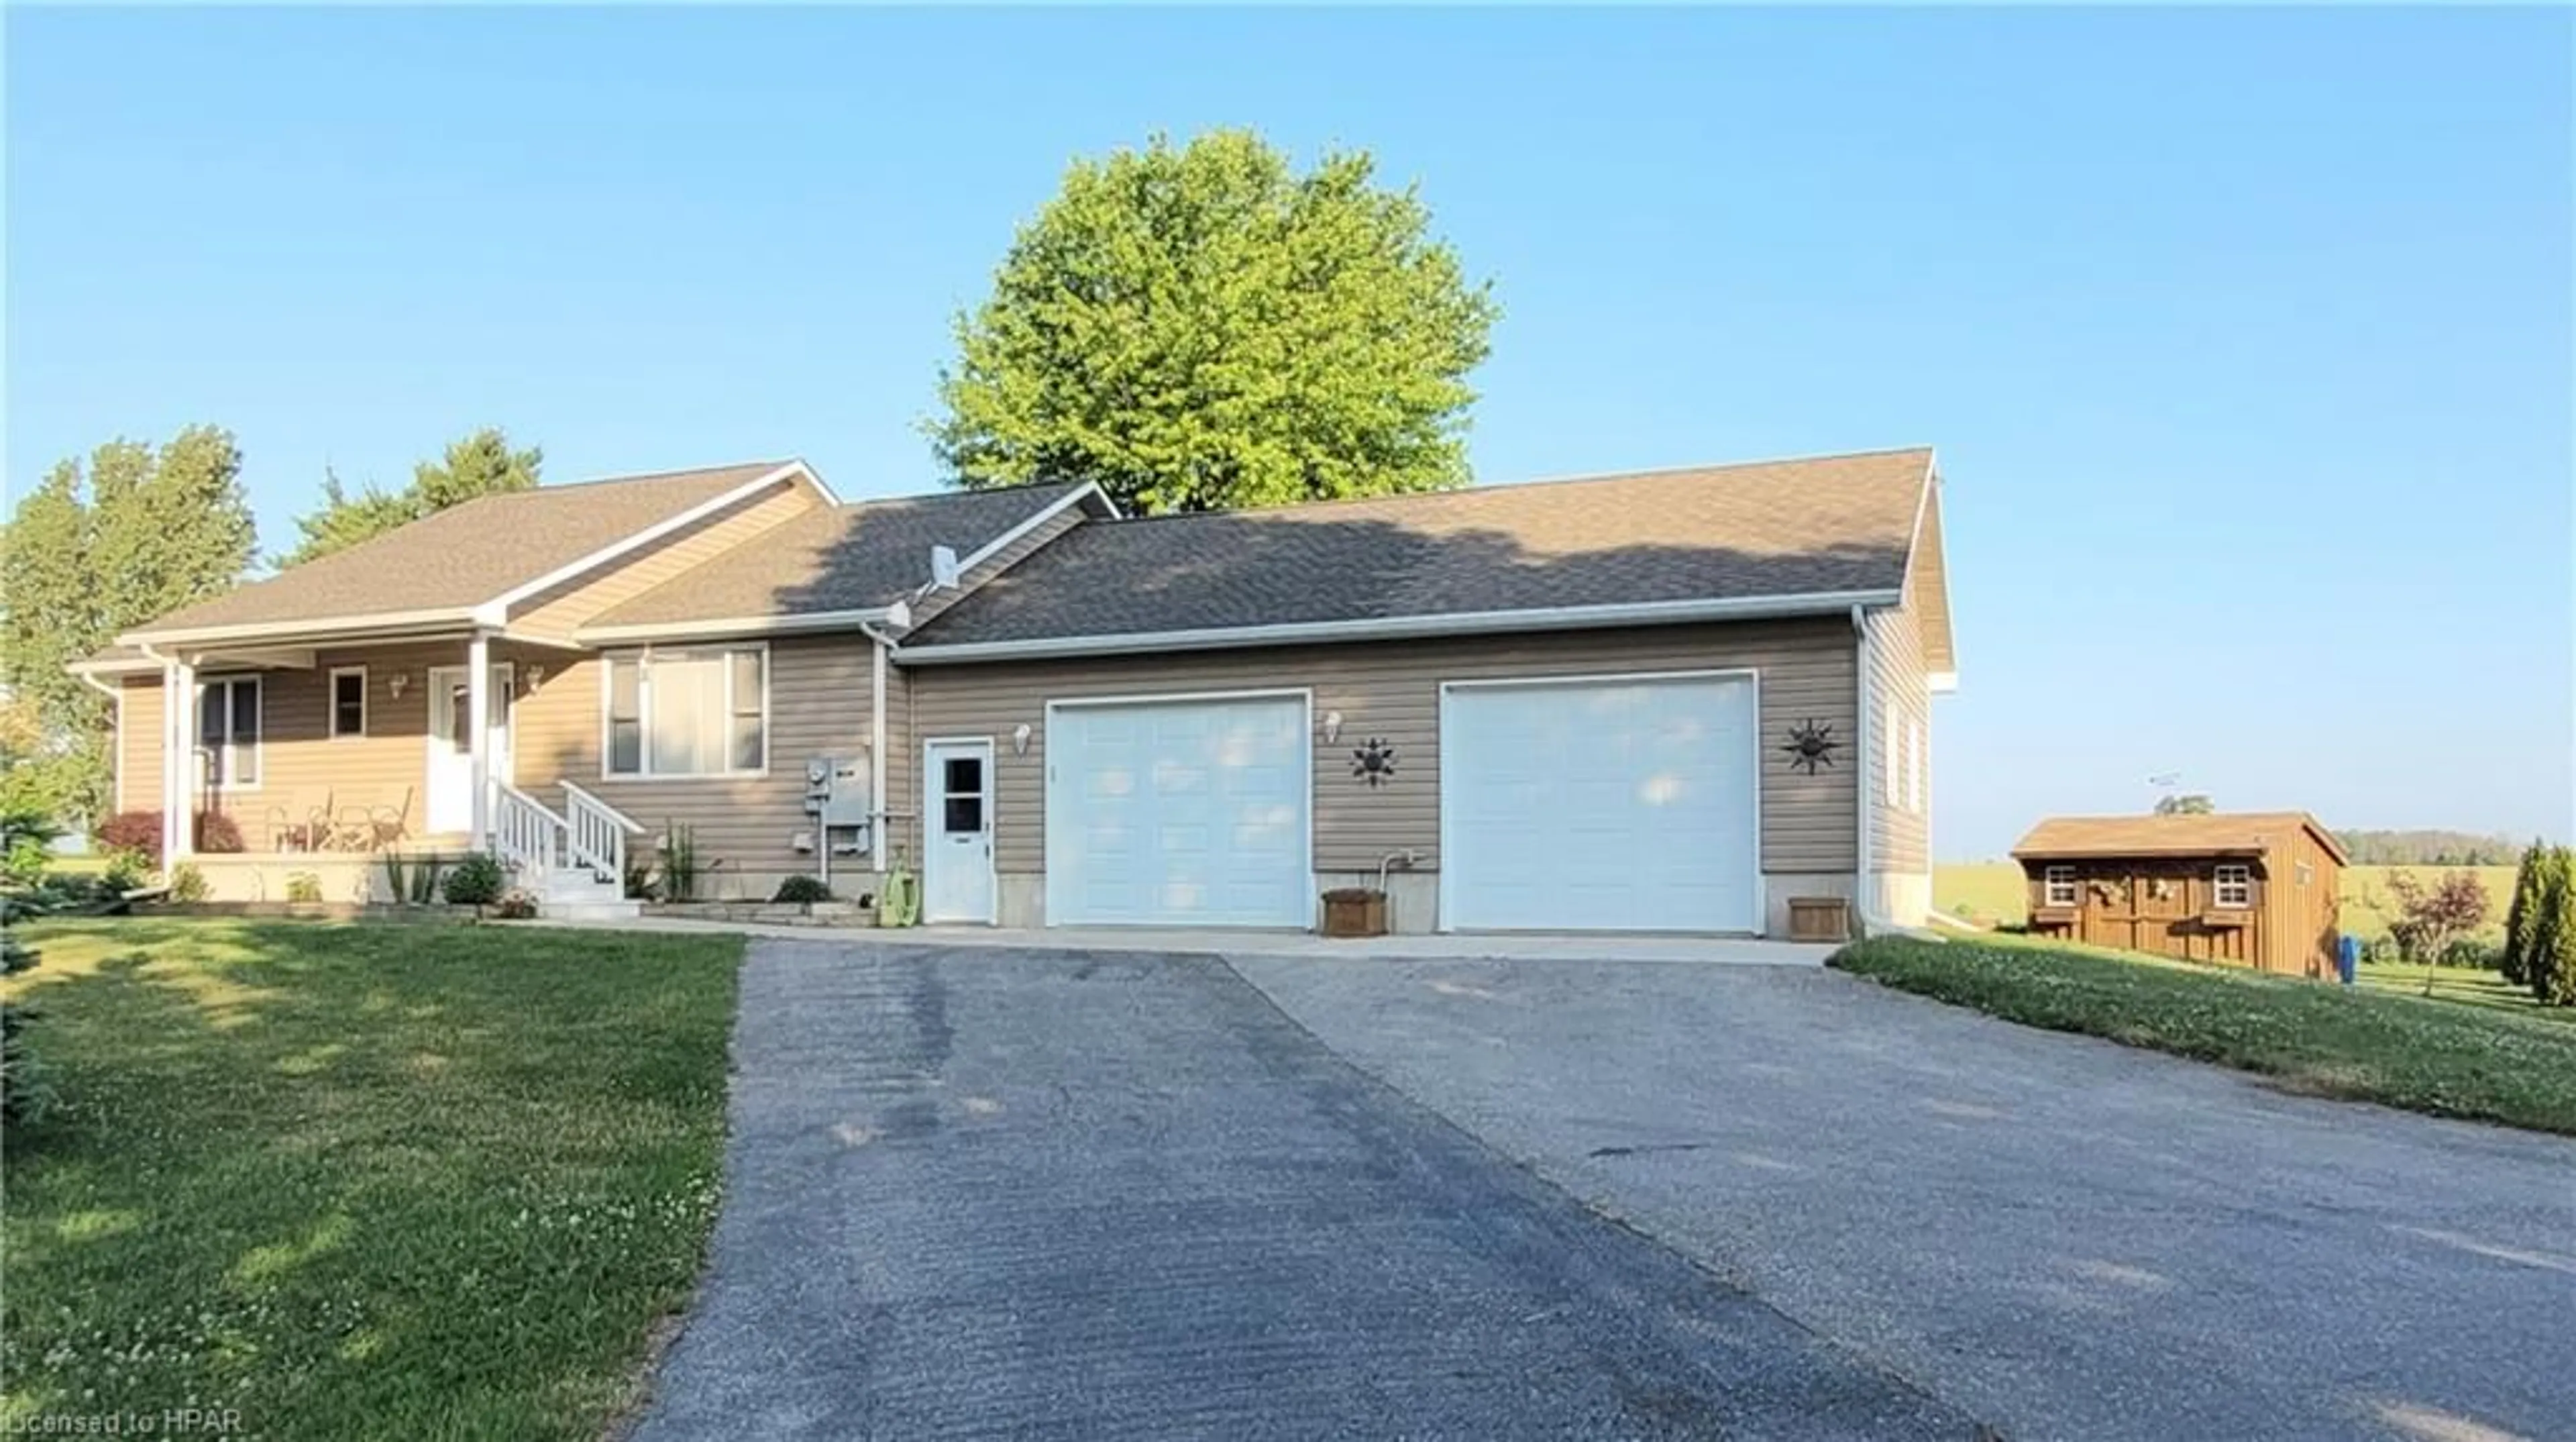 Frontside or backside of a home for 84141 London Rd, North Huron Ontario N0M 1H0